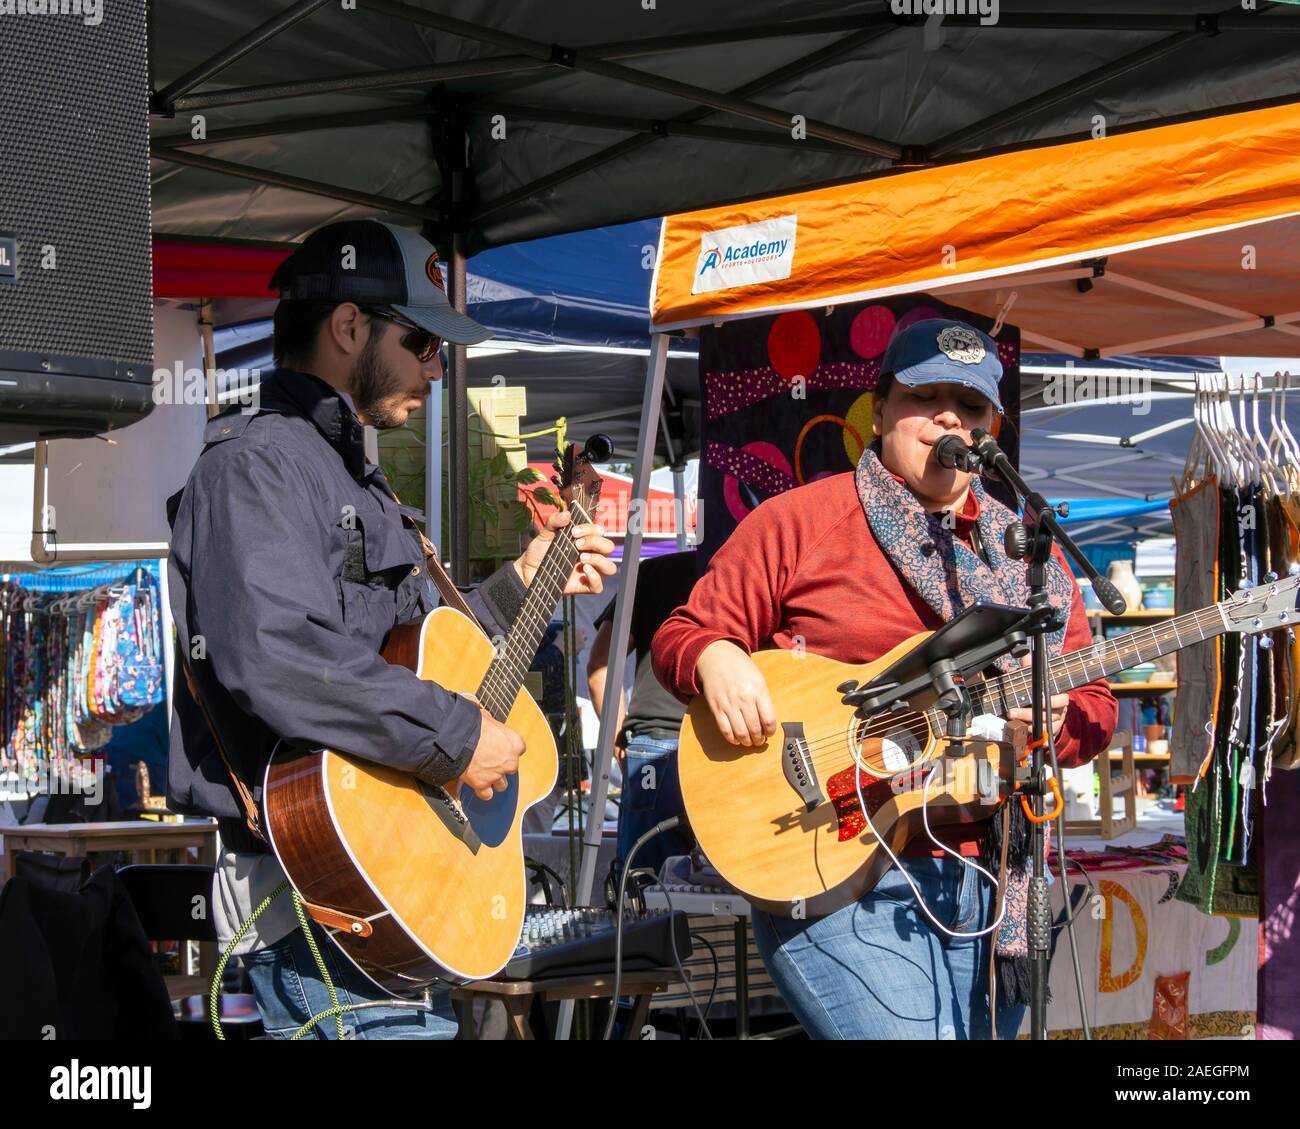 Musicians play acoustical guitar and sing at the Corpus Christi, Texas USA Southside Farmer's Market. Stock Photo